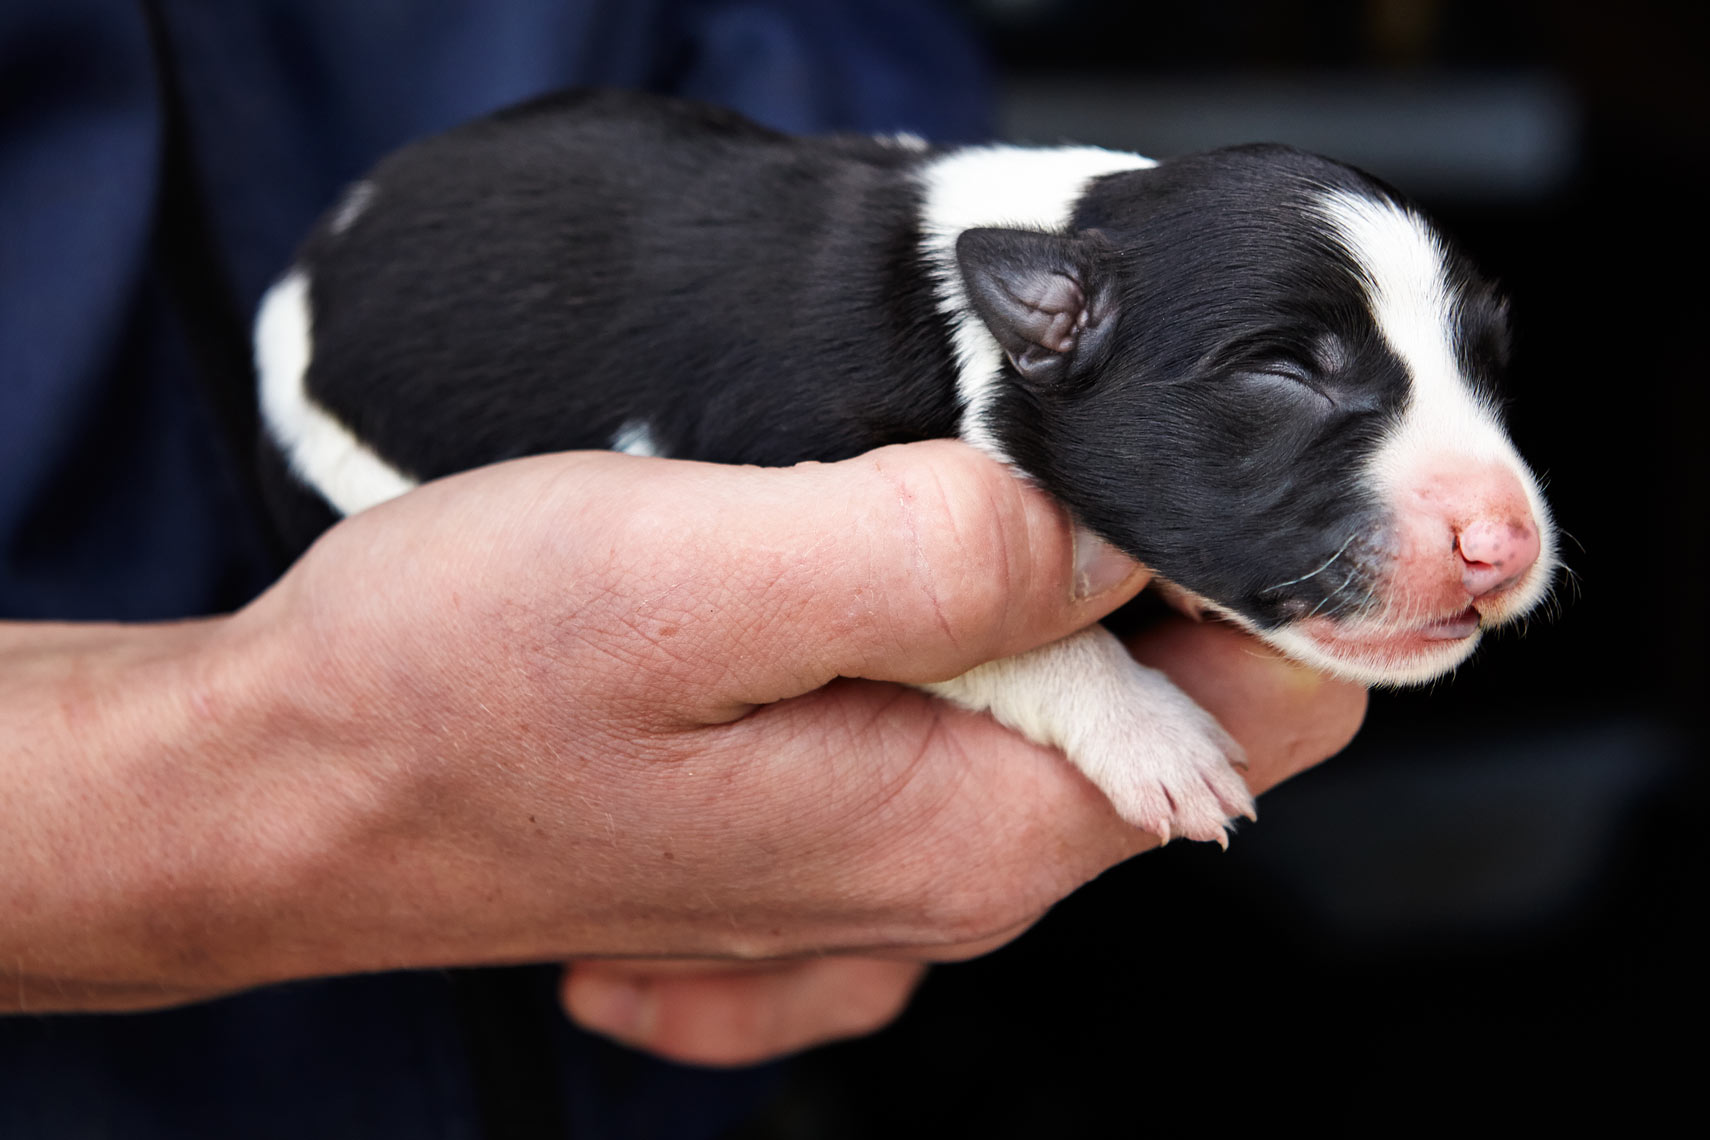 One day old sheepdog pup